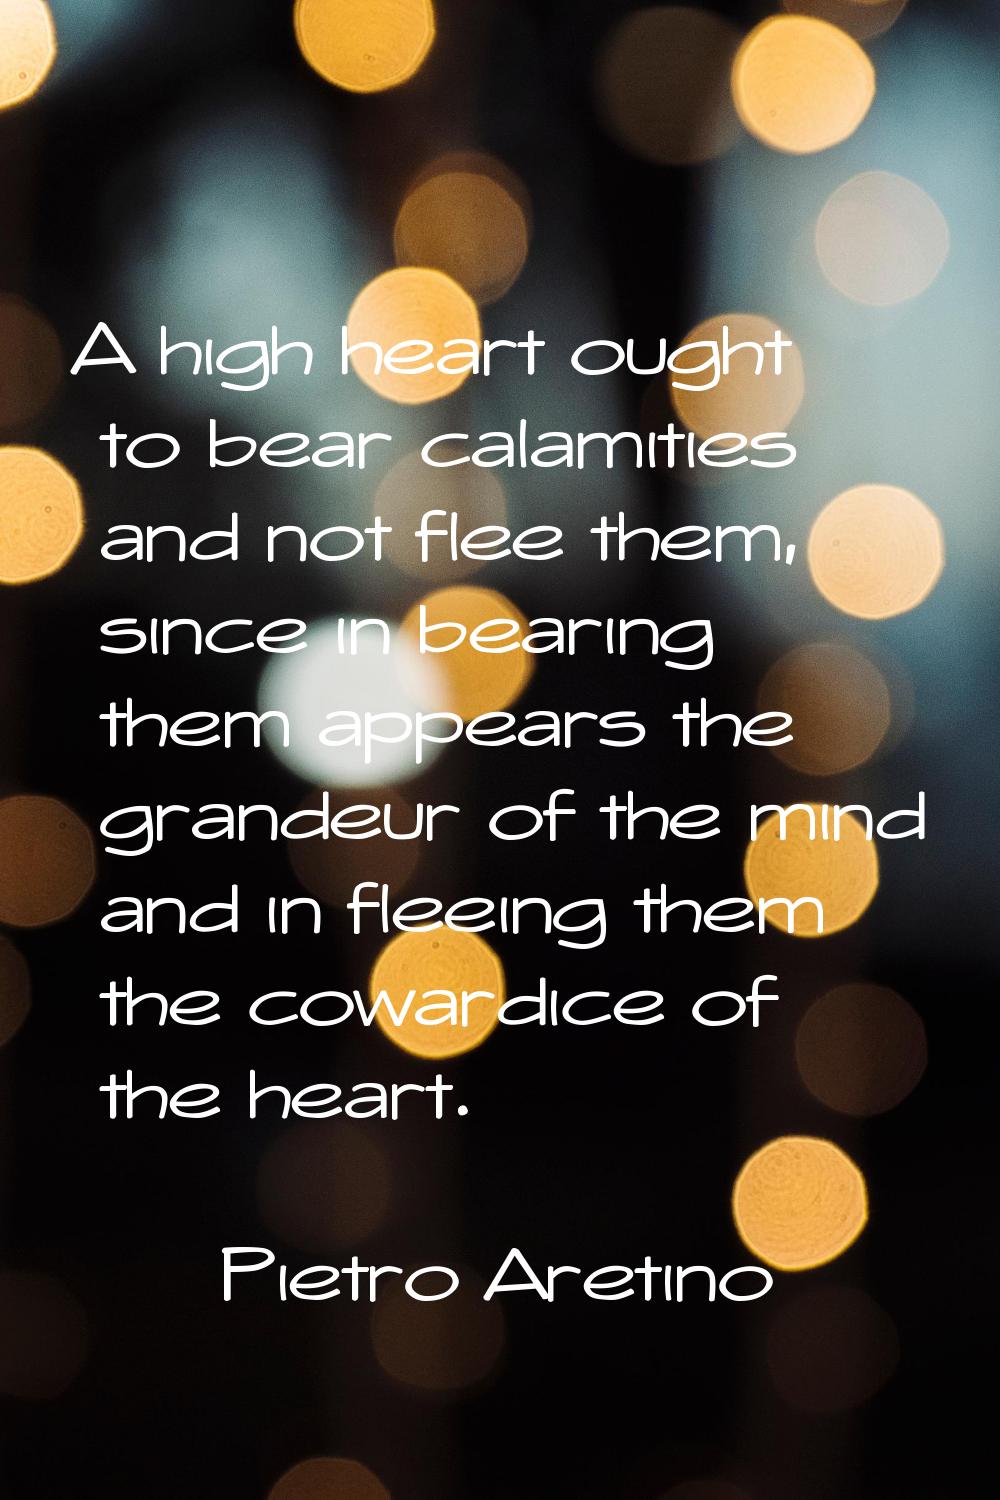 A high heart ought to bear calamities and not flee them, since in bearing them appears the grandeur